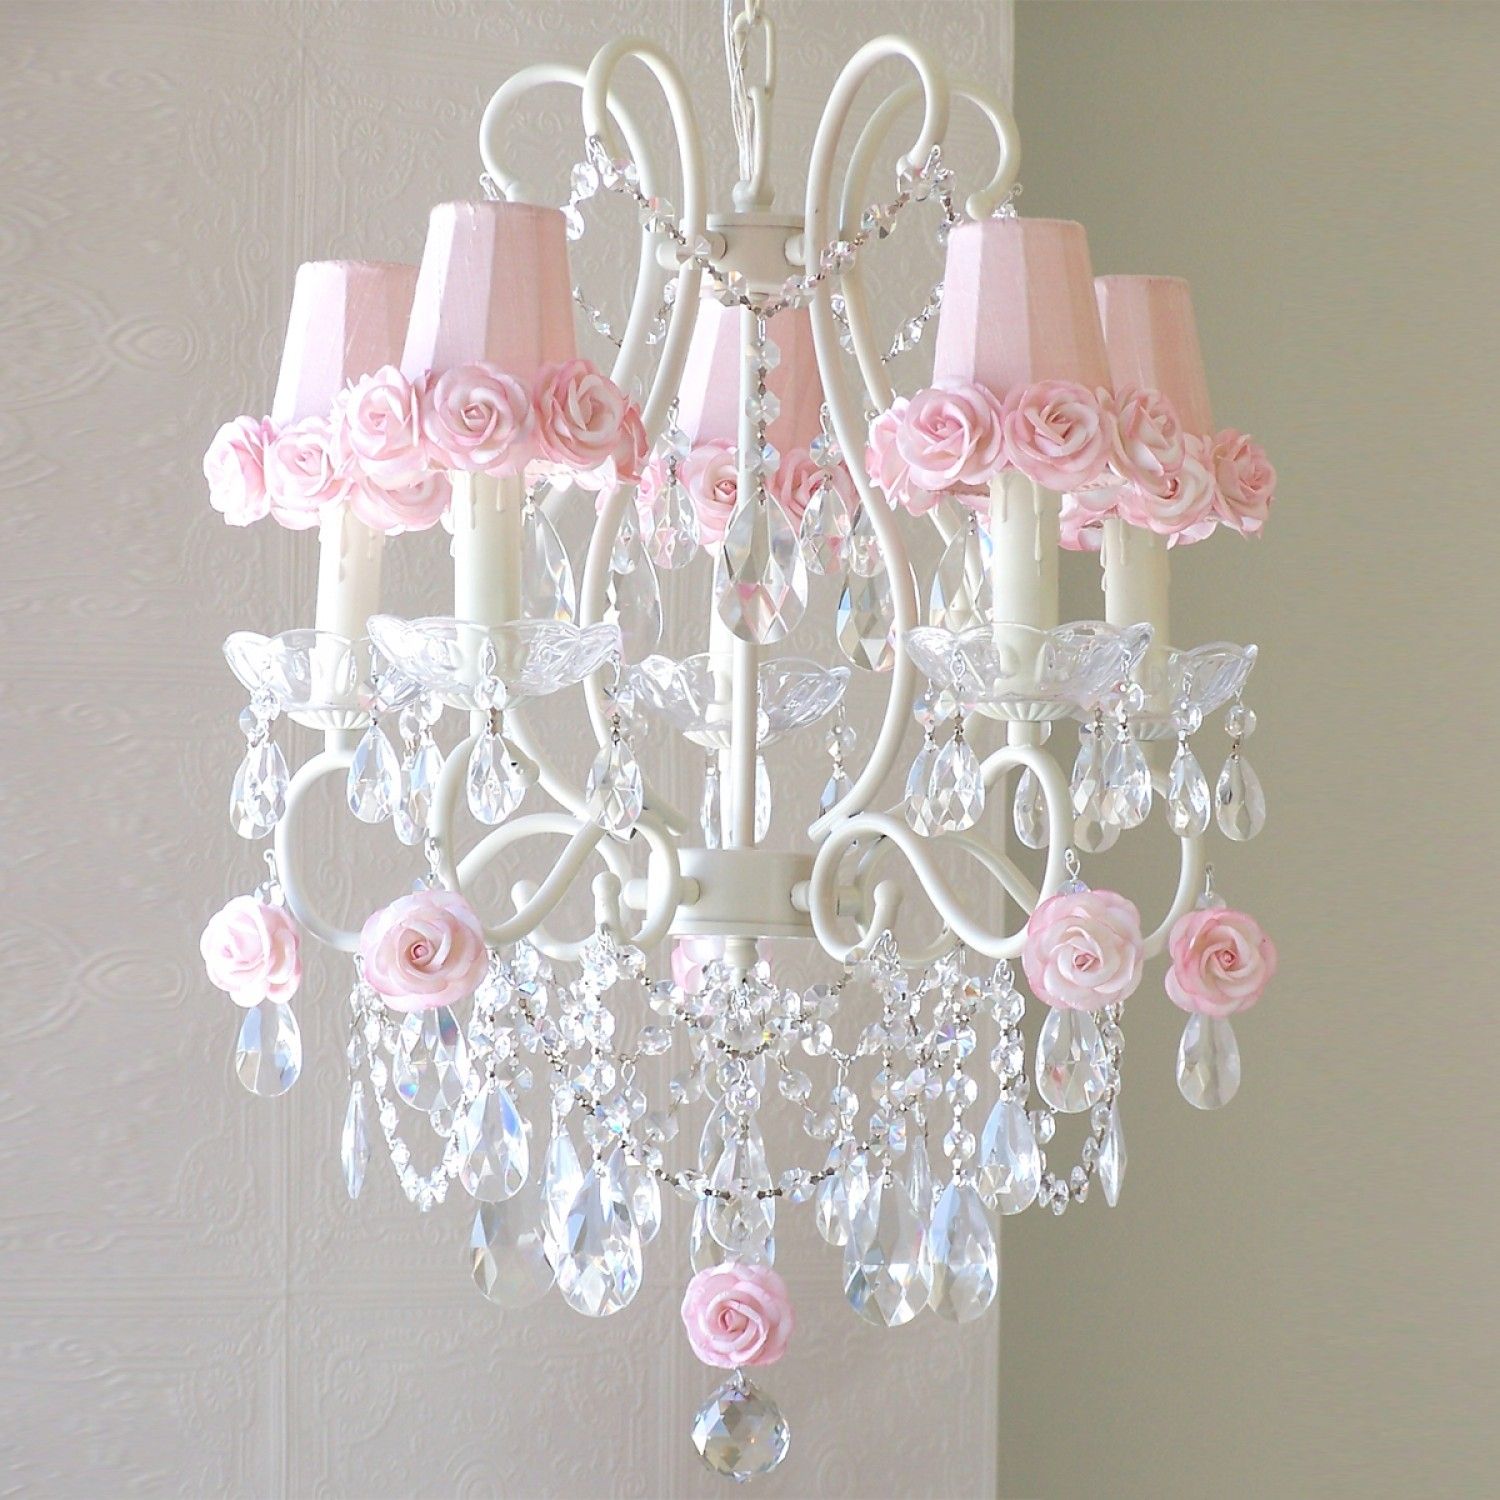 The Best Chandelier Lamp Shades Best Home Decor Inspirations Throughout Chandeliers With Lamp Shades (View 11 of 25)